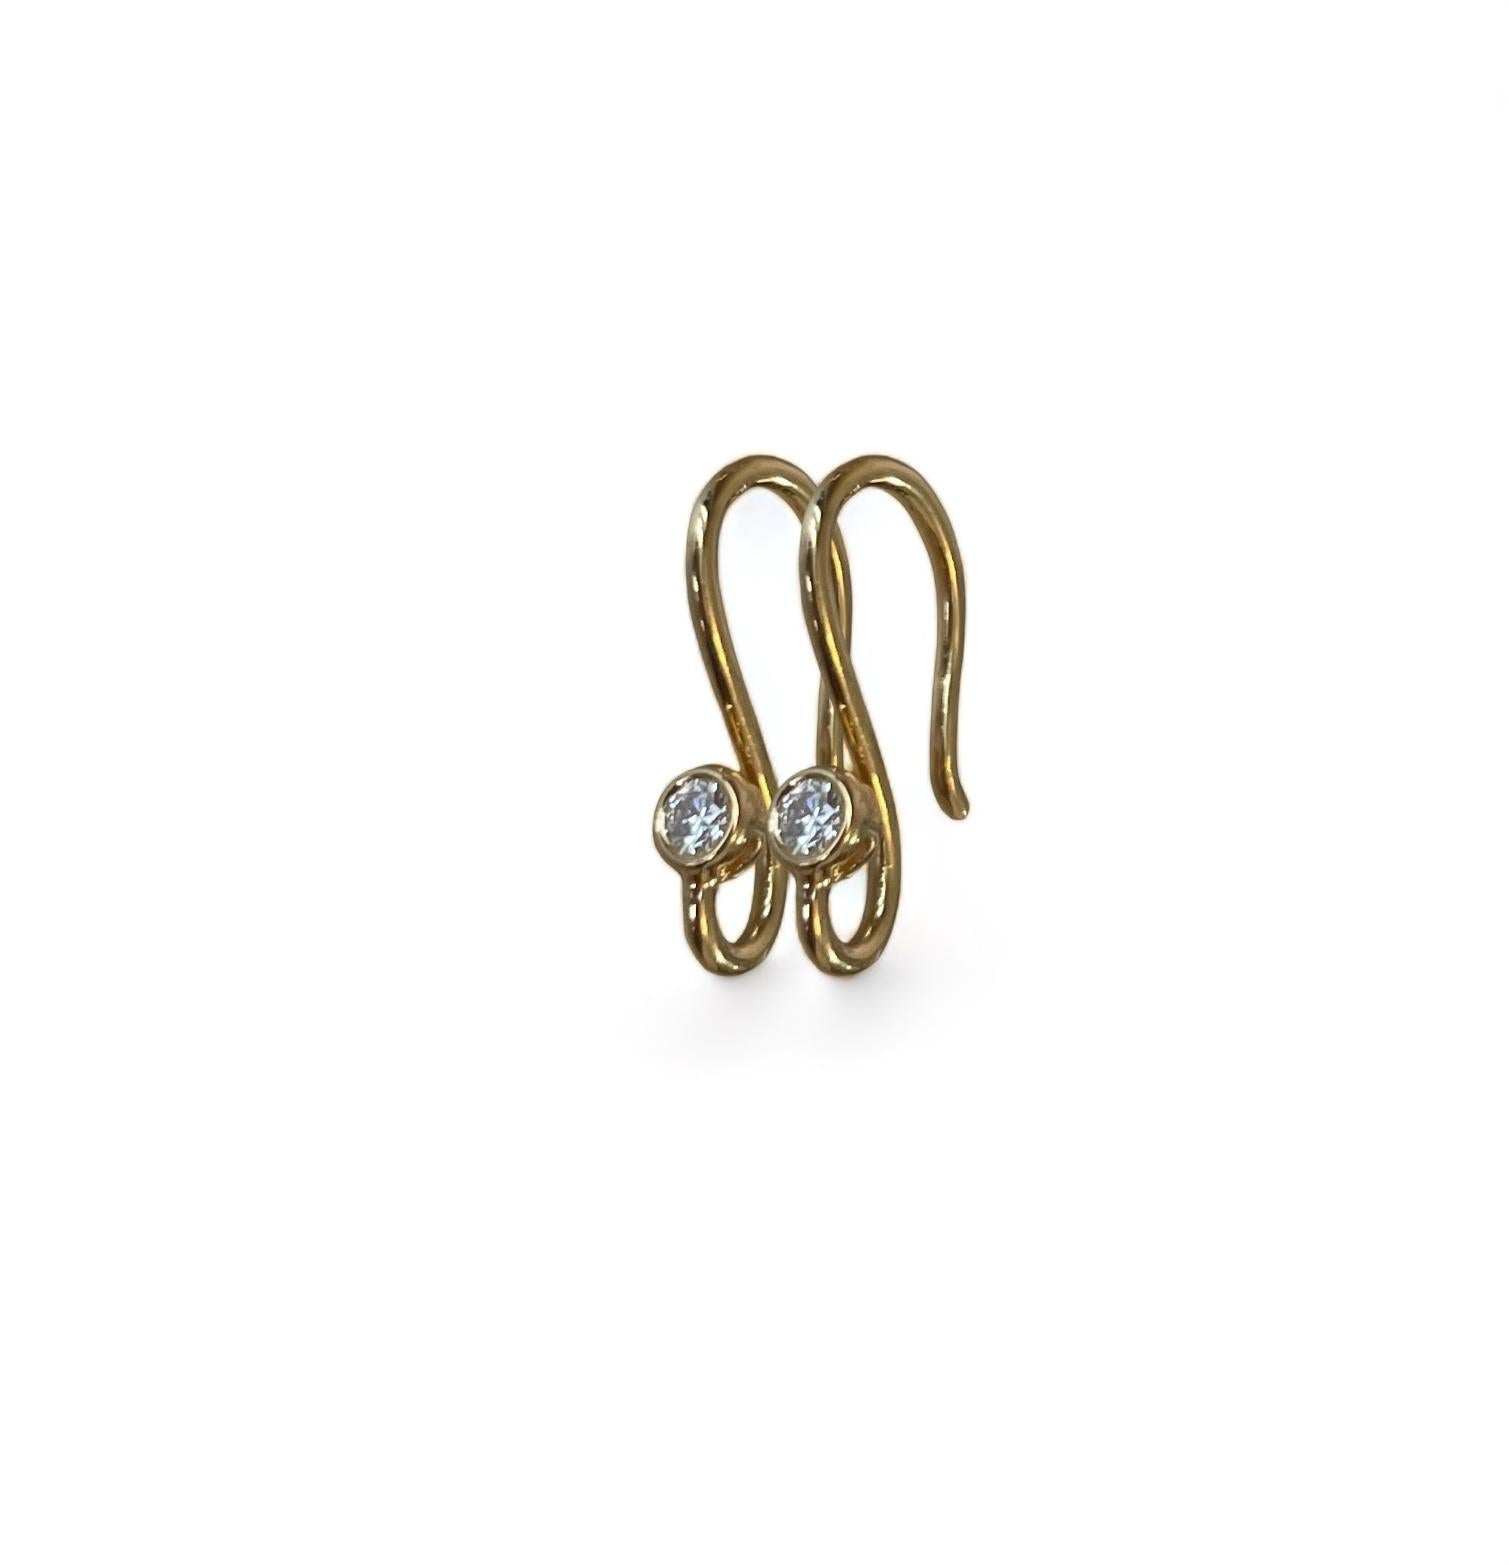 Brilliant Cut French wire earring with Natural Diamonds earring in 18k solid gold